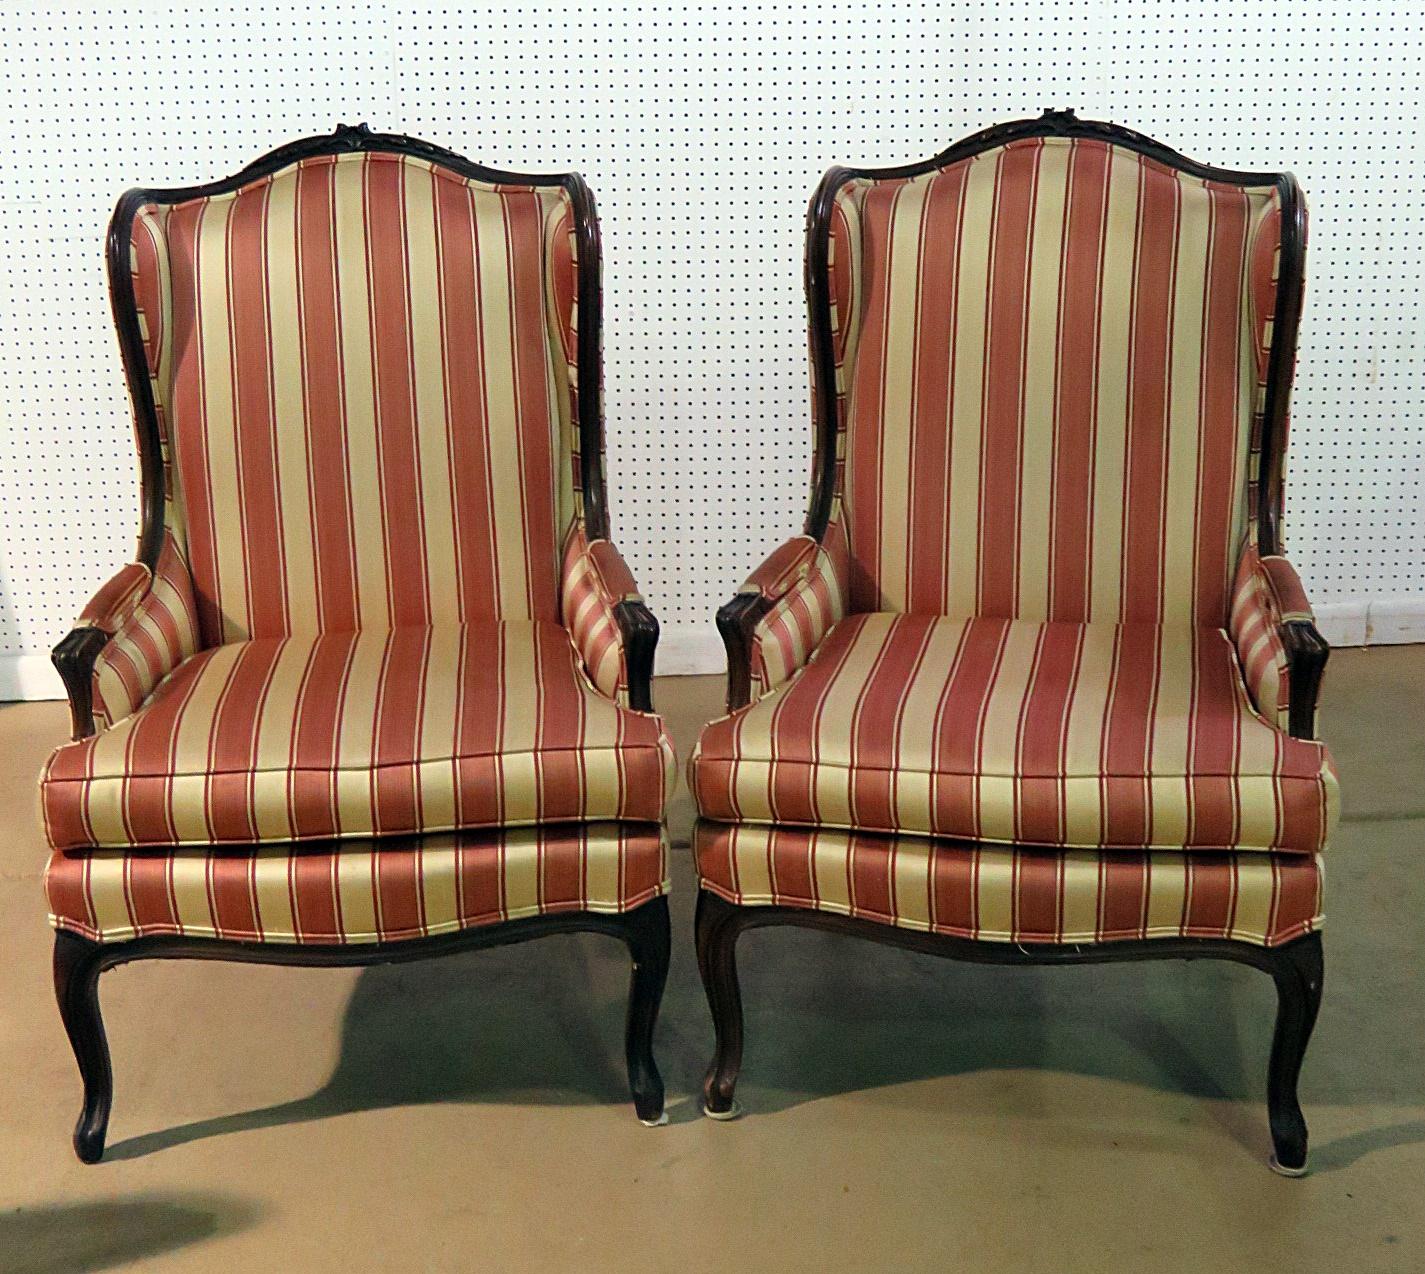 Pair of Louis XV style wingback chairs with striped upholstery.